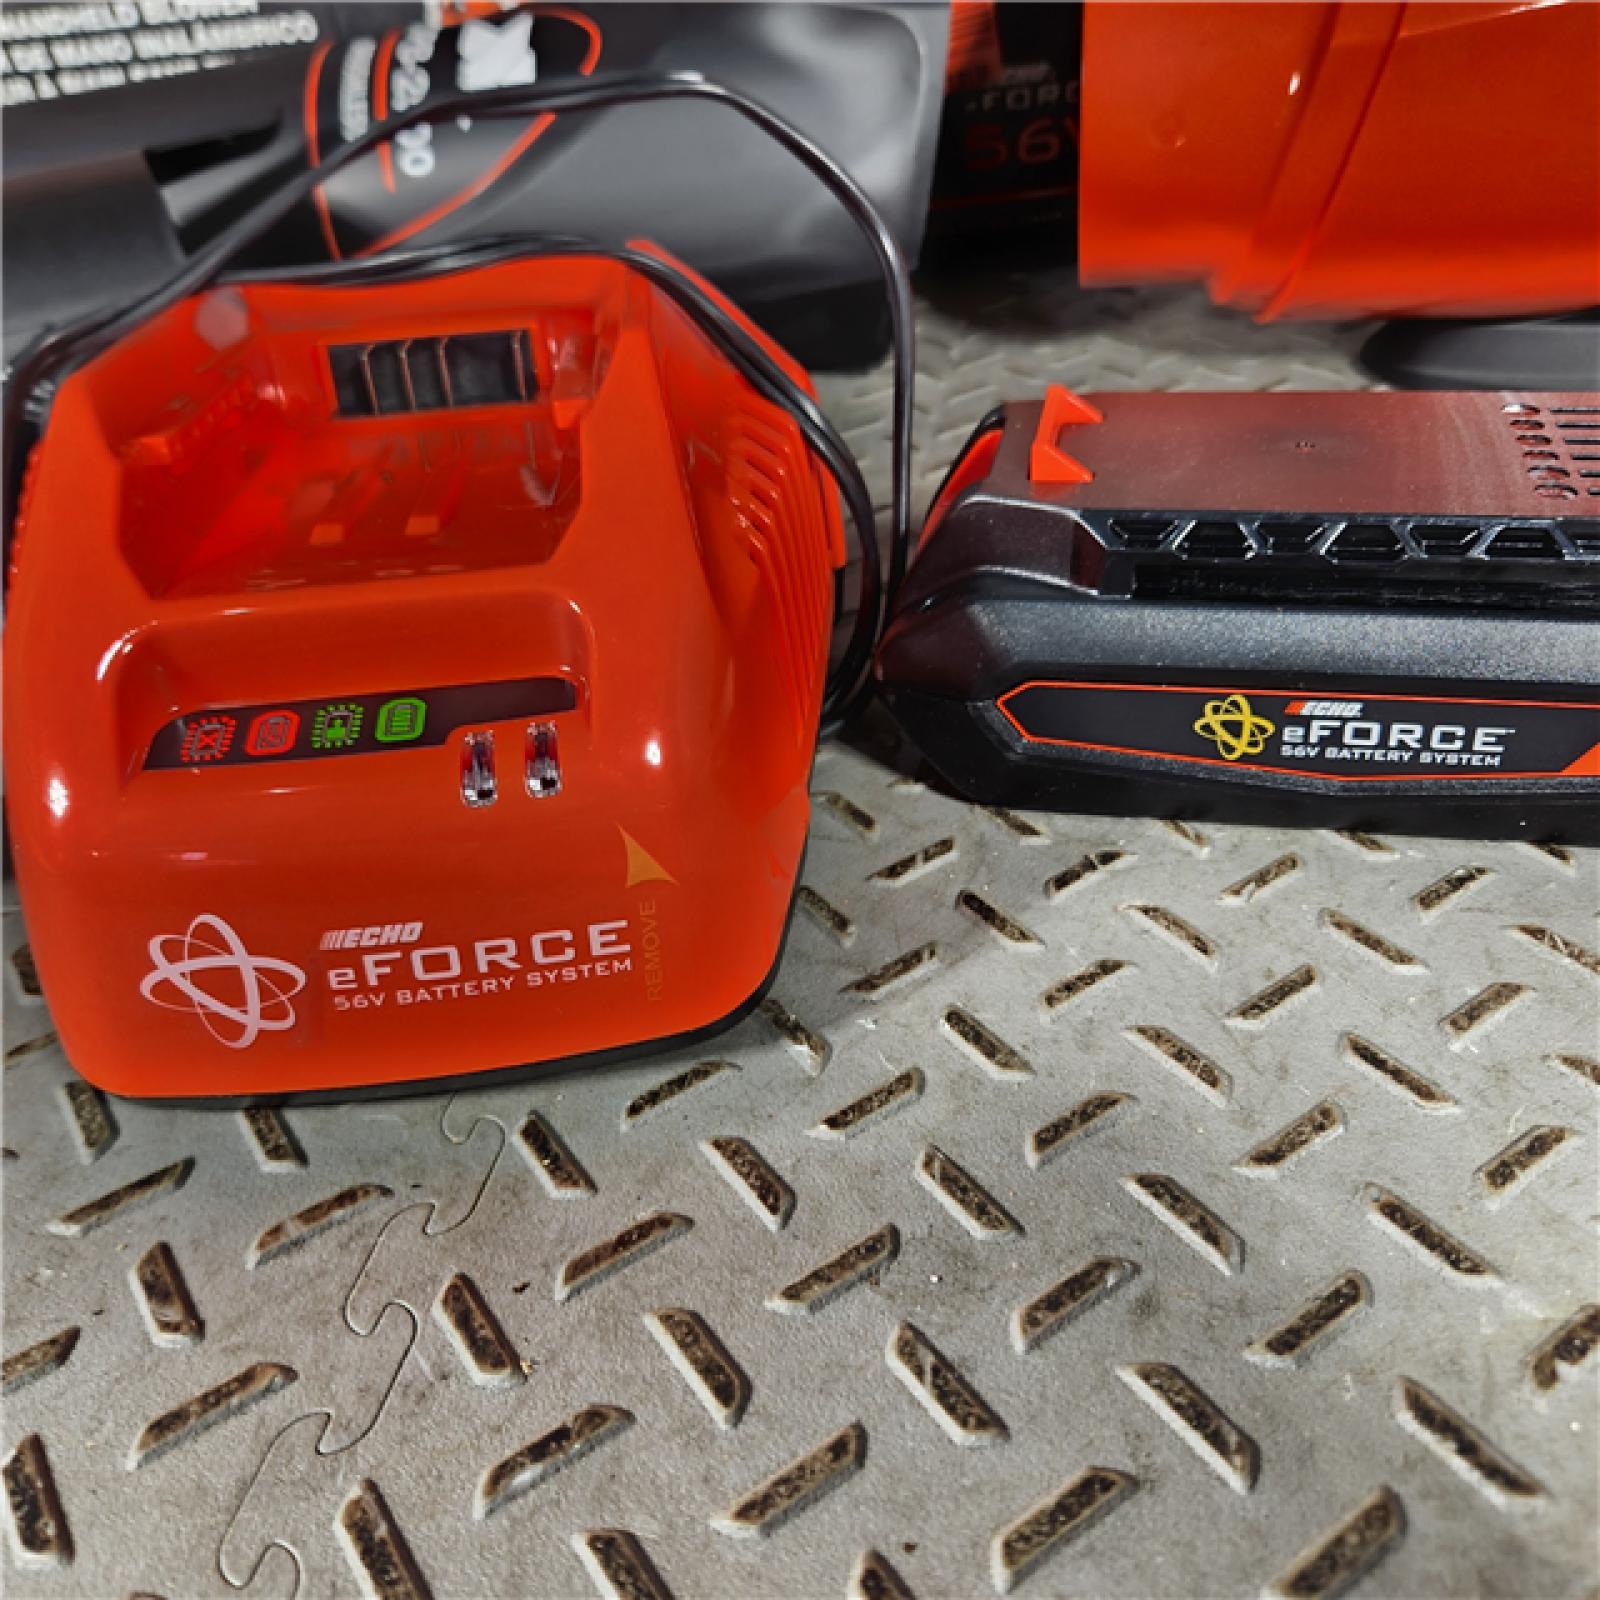 Houston Location - AS-IS Echo EFORCE 56V X Series 151 MPH 526 CFM Cordless Battery Handheld Leaf Blower with 2.5Ah Battery and Charger - Appears IN GOOD Condition